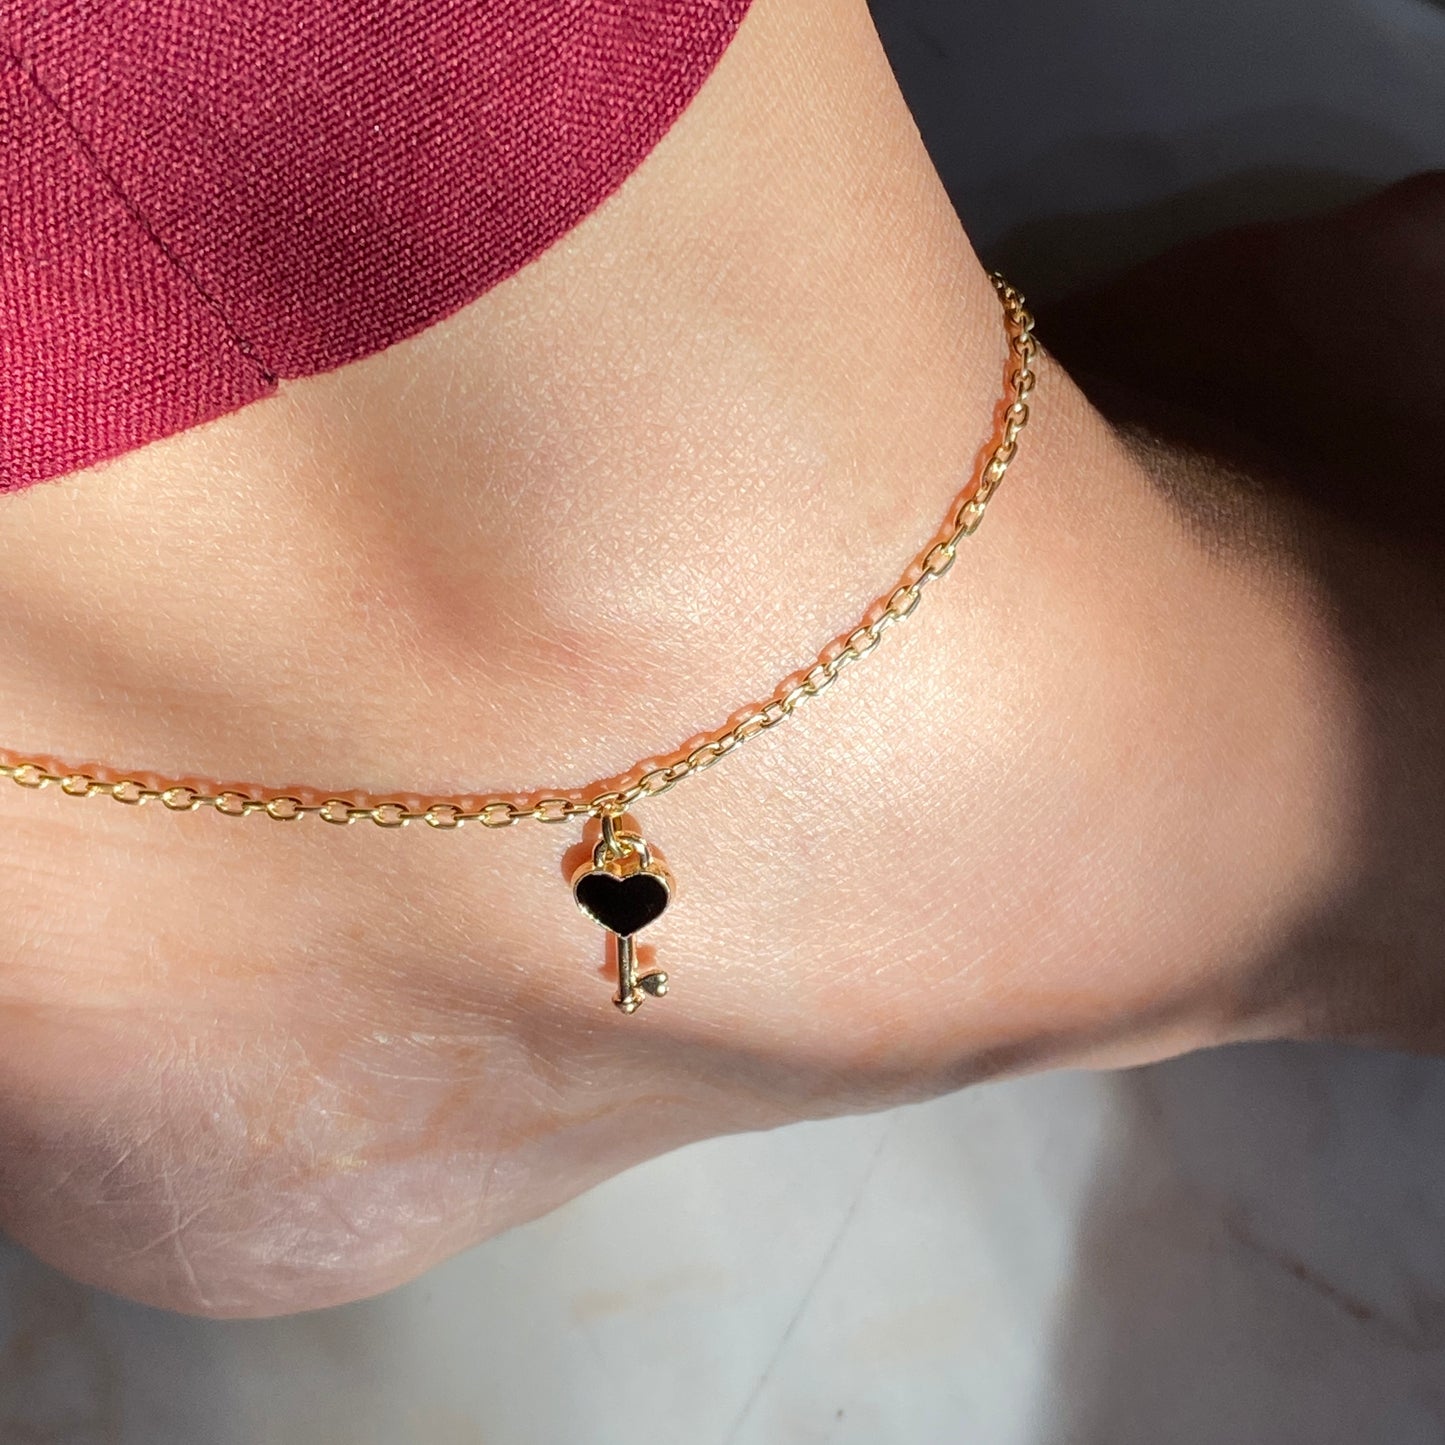 LOCK AND KEY ANKLETS